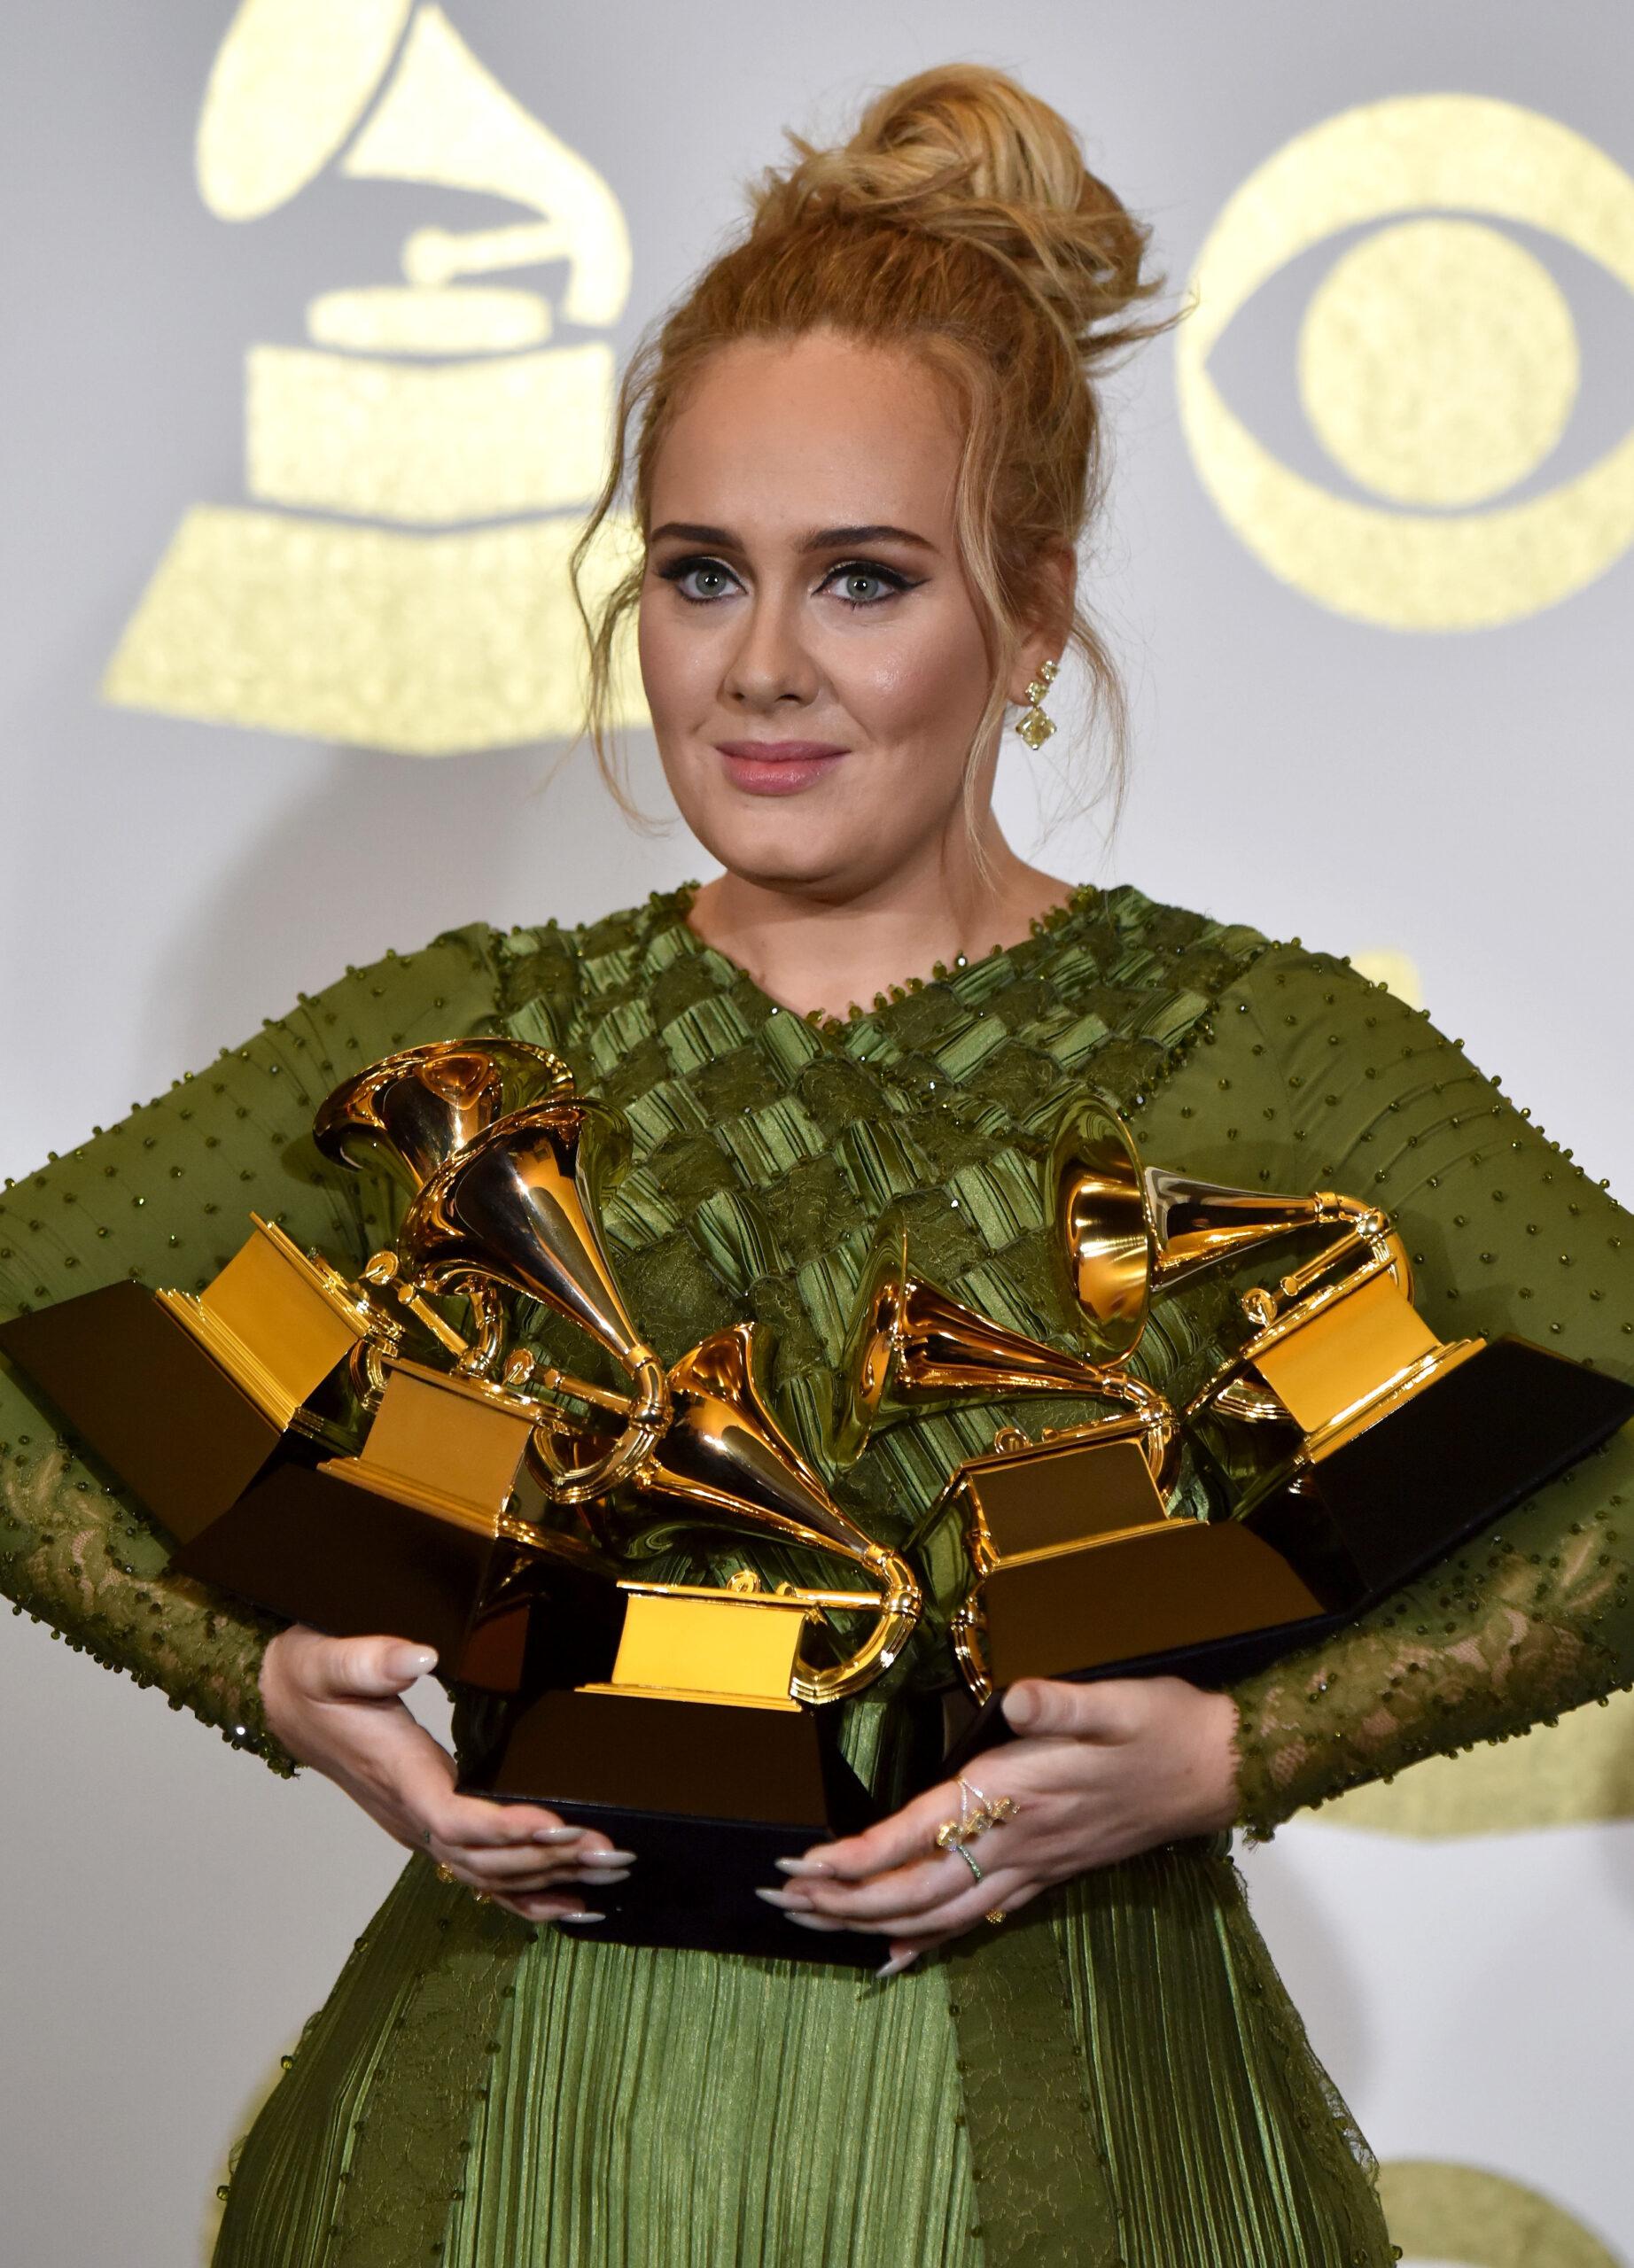 Adele's Concert Tickets Are Going For A Whopping $40,000 EACH In Las Vegas!